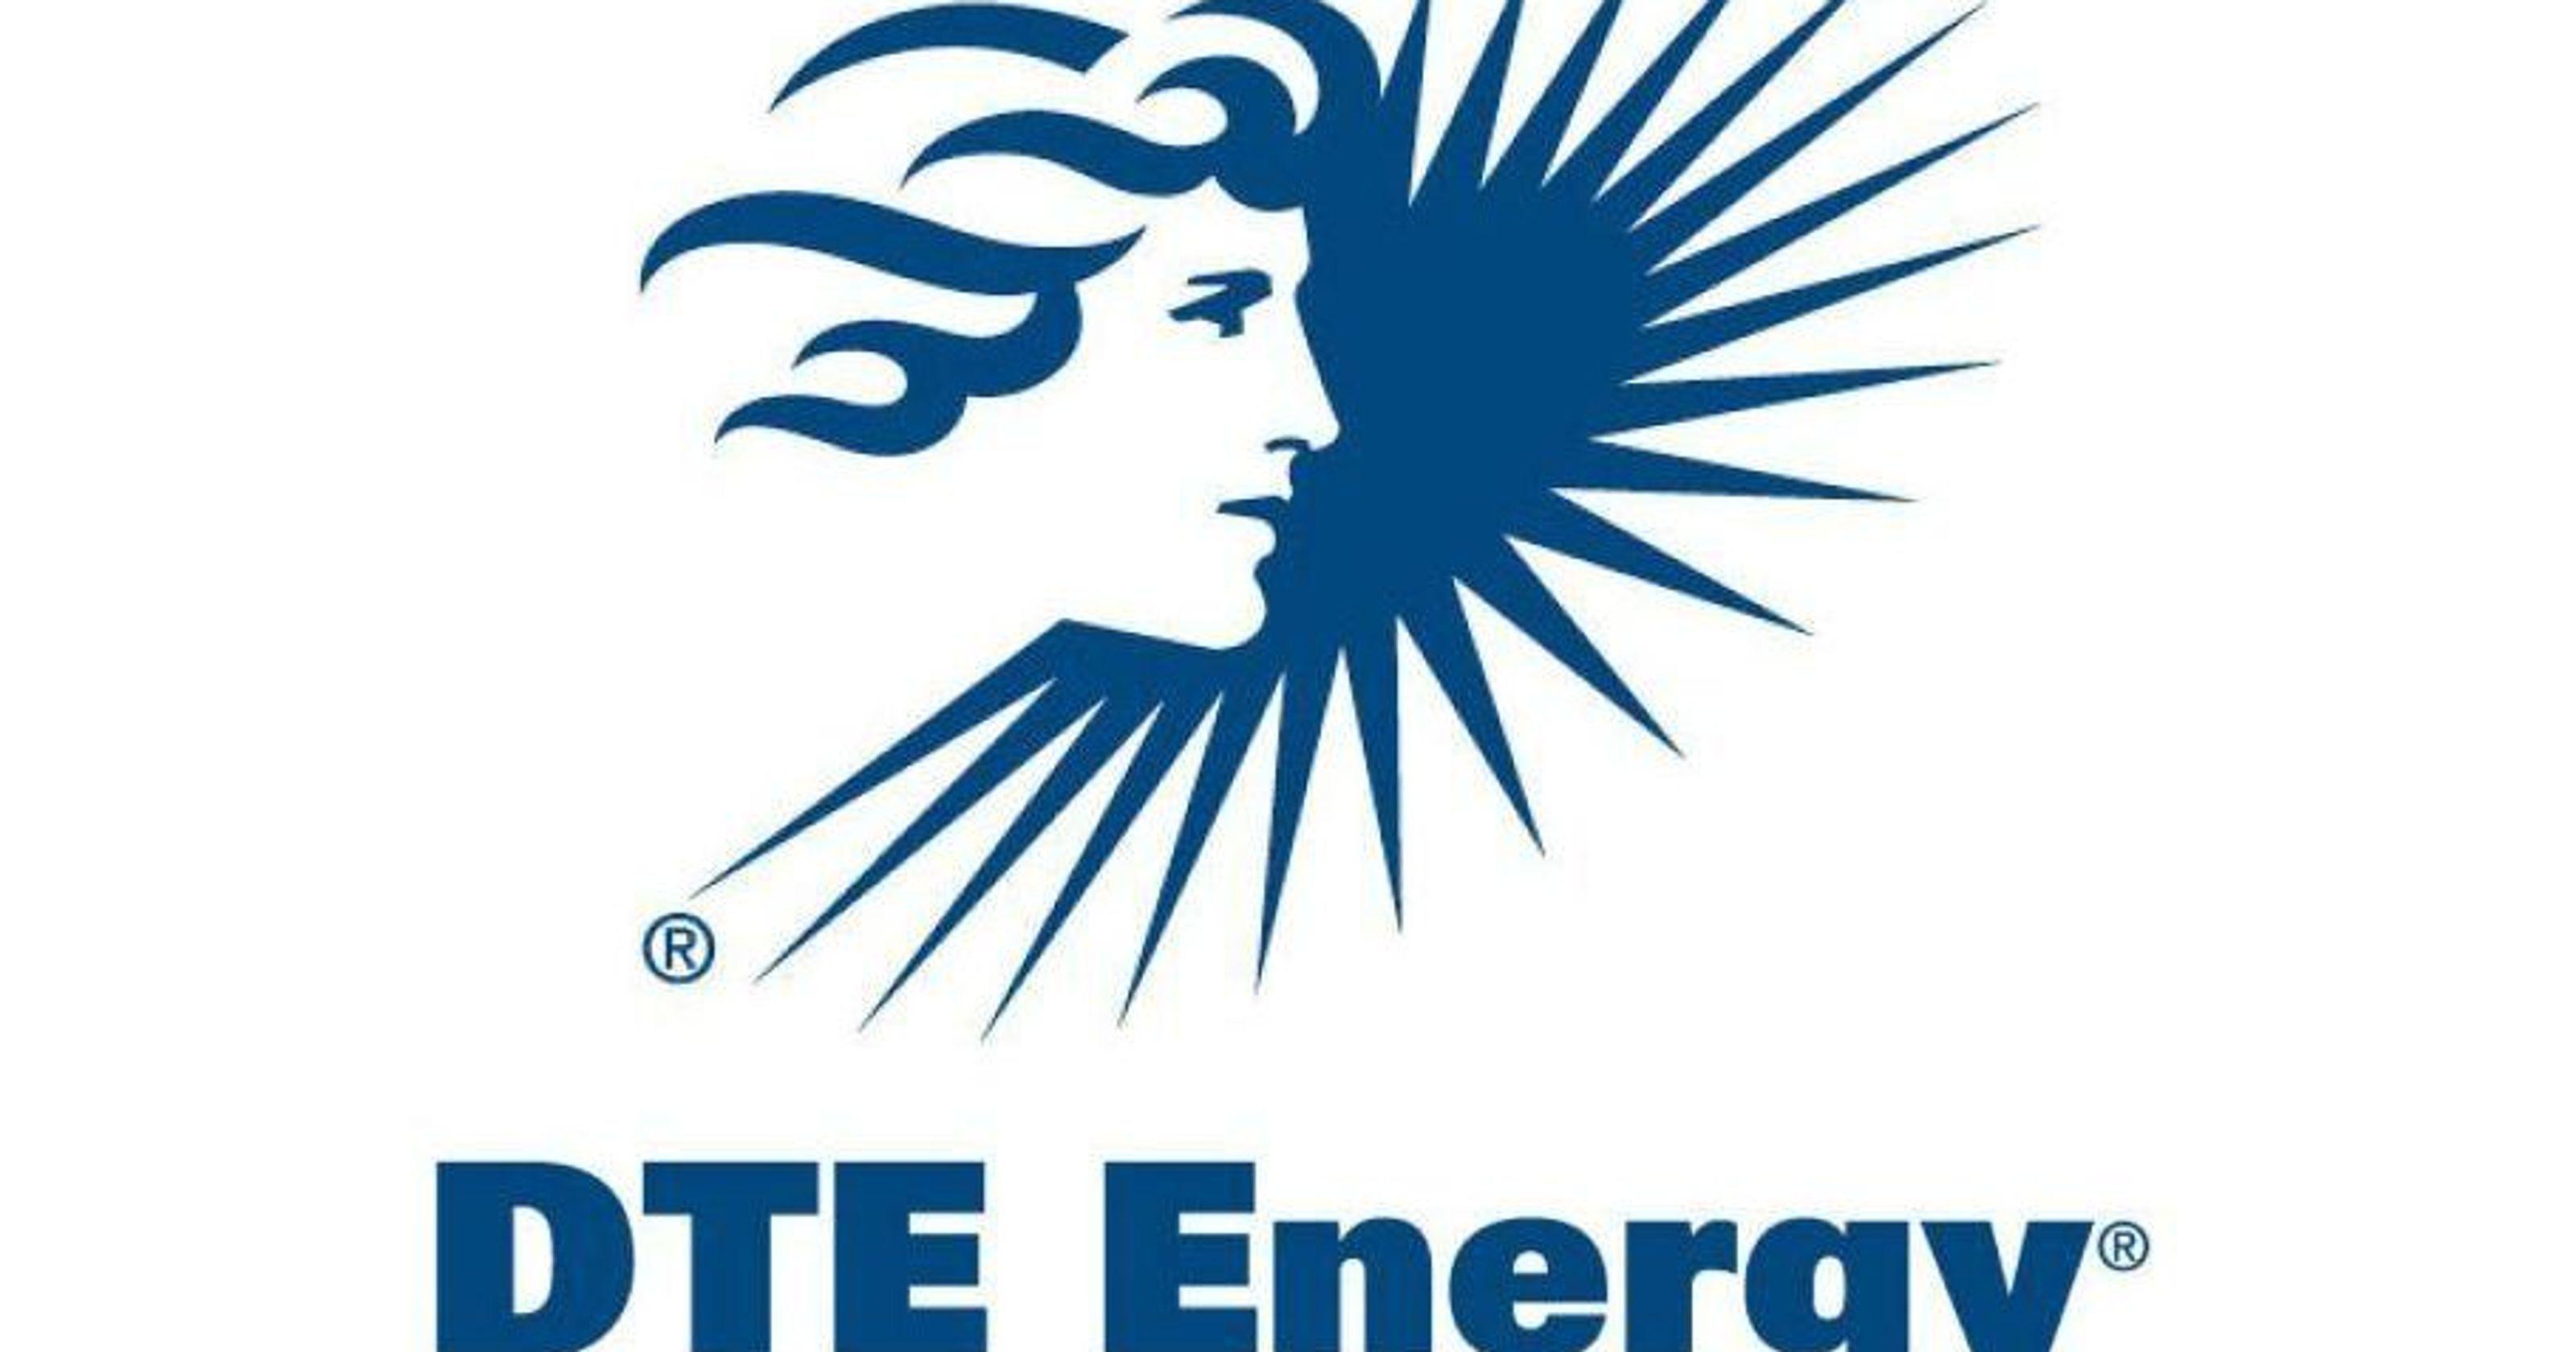 DTE Logo - 23,000 DTE Energy customers still without power after storm